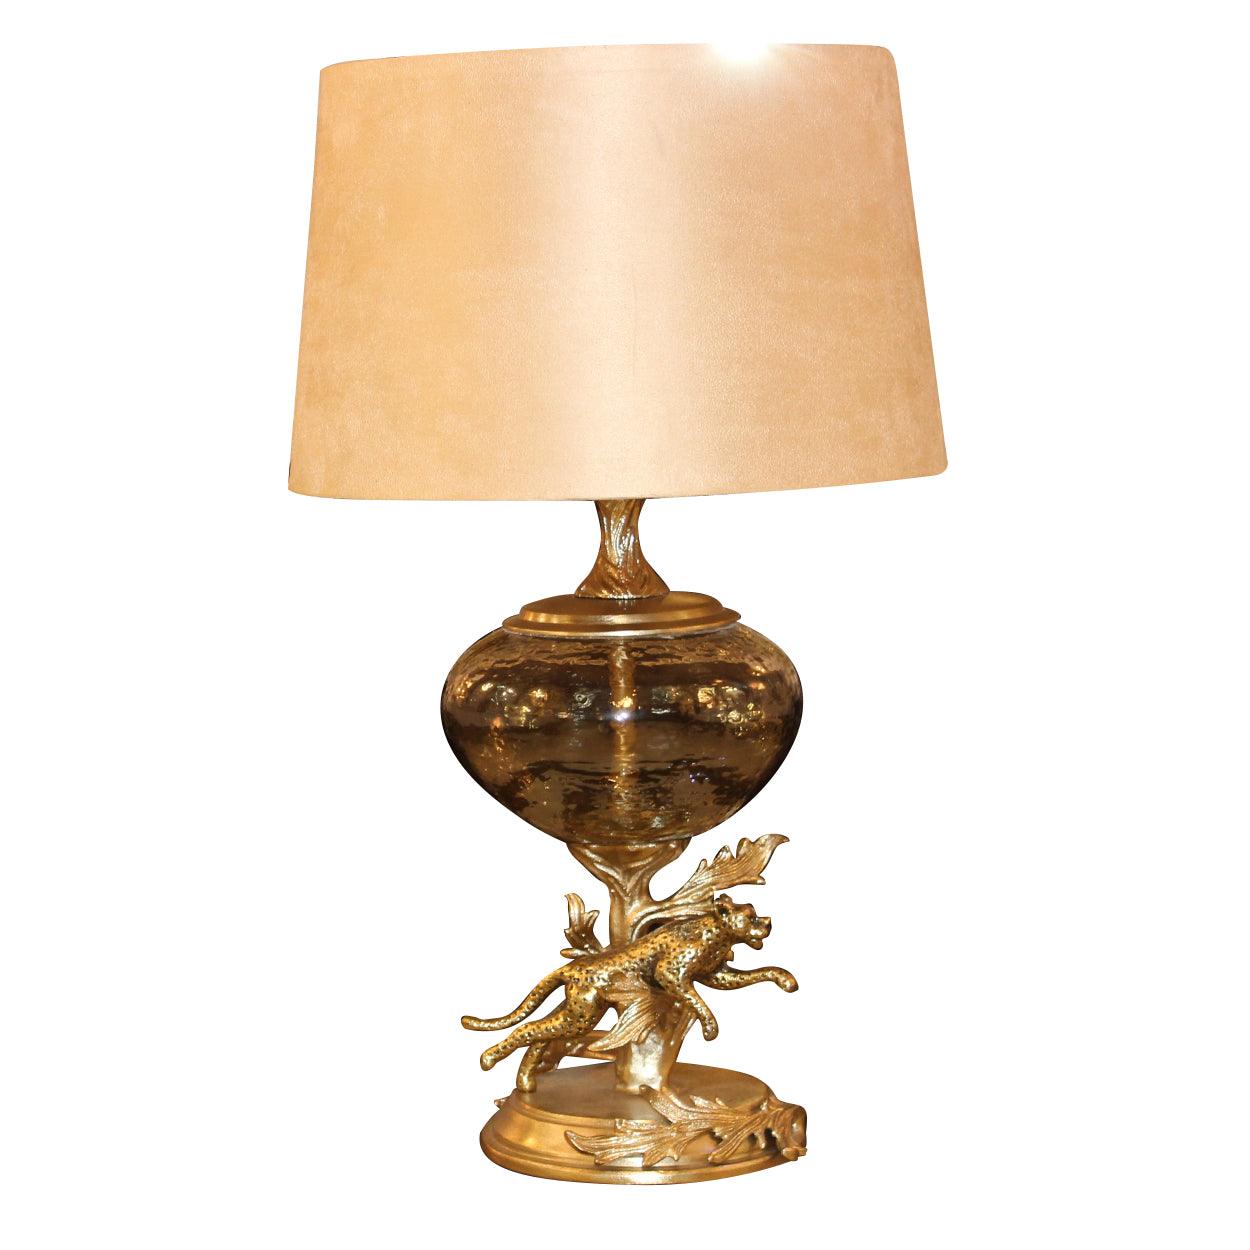 RUNNING LEOPARD HAND MADE METAL AND GLASS TABLE LAMP - Ankur Lighting